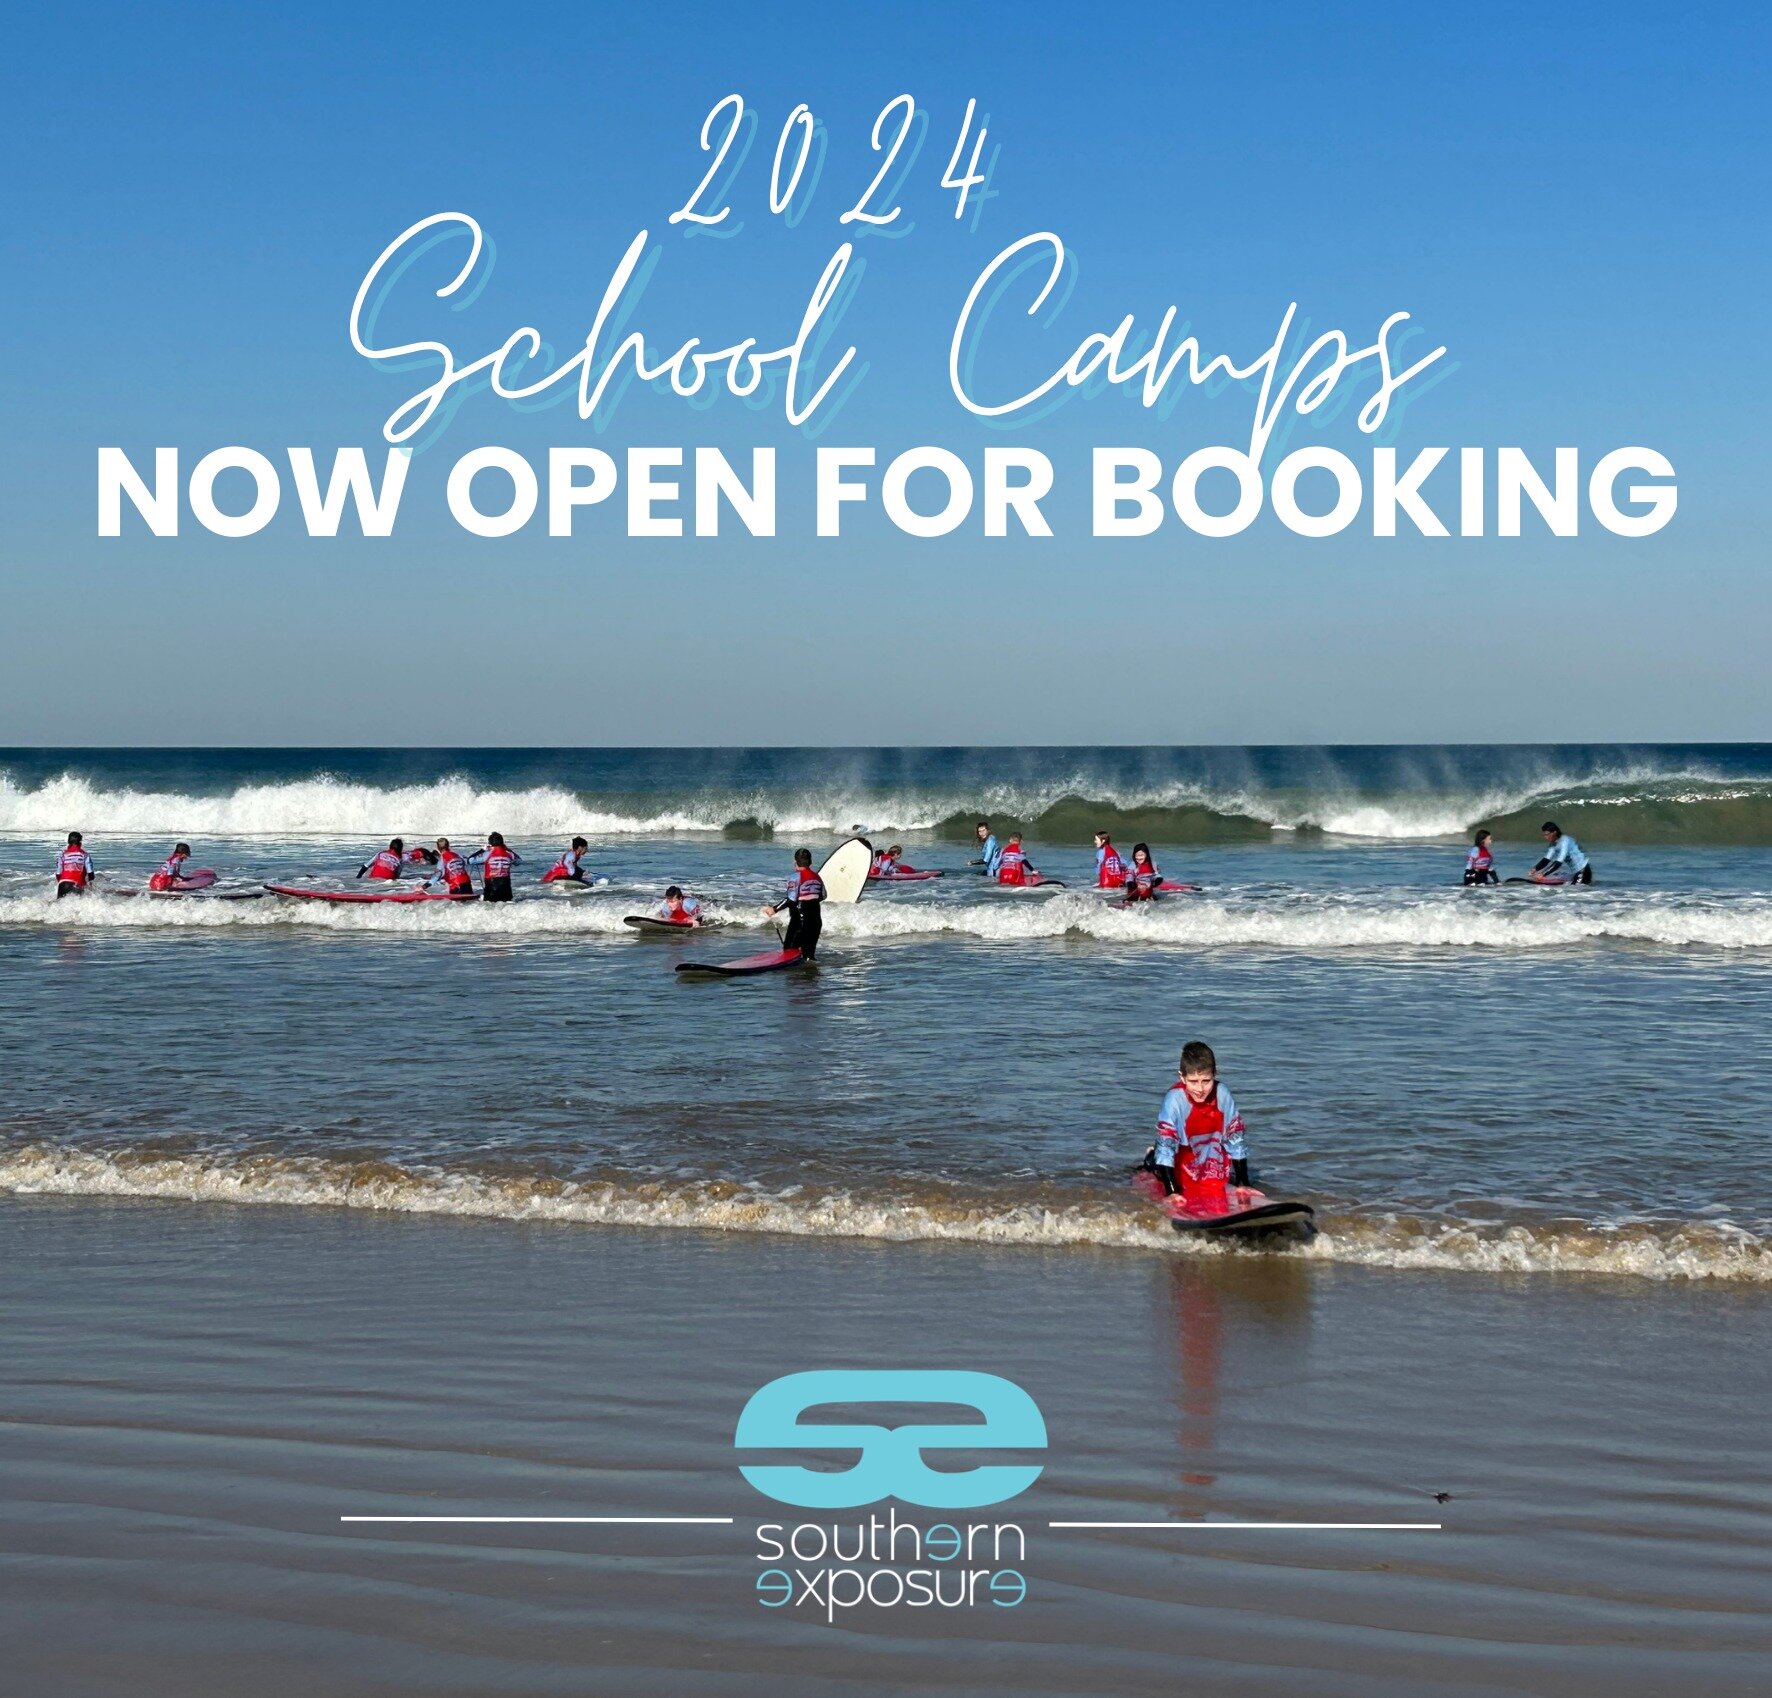 2024 School Camps | NOW OPEN FOR BOOKINGS

Get onto planning the 2024 Calendar Year for your classroom! 
Build out your curriculum goals with Southern Exposure. 

Gain students individual and team building development skills, as well as engaging your